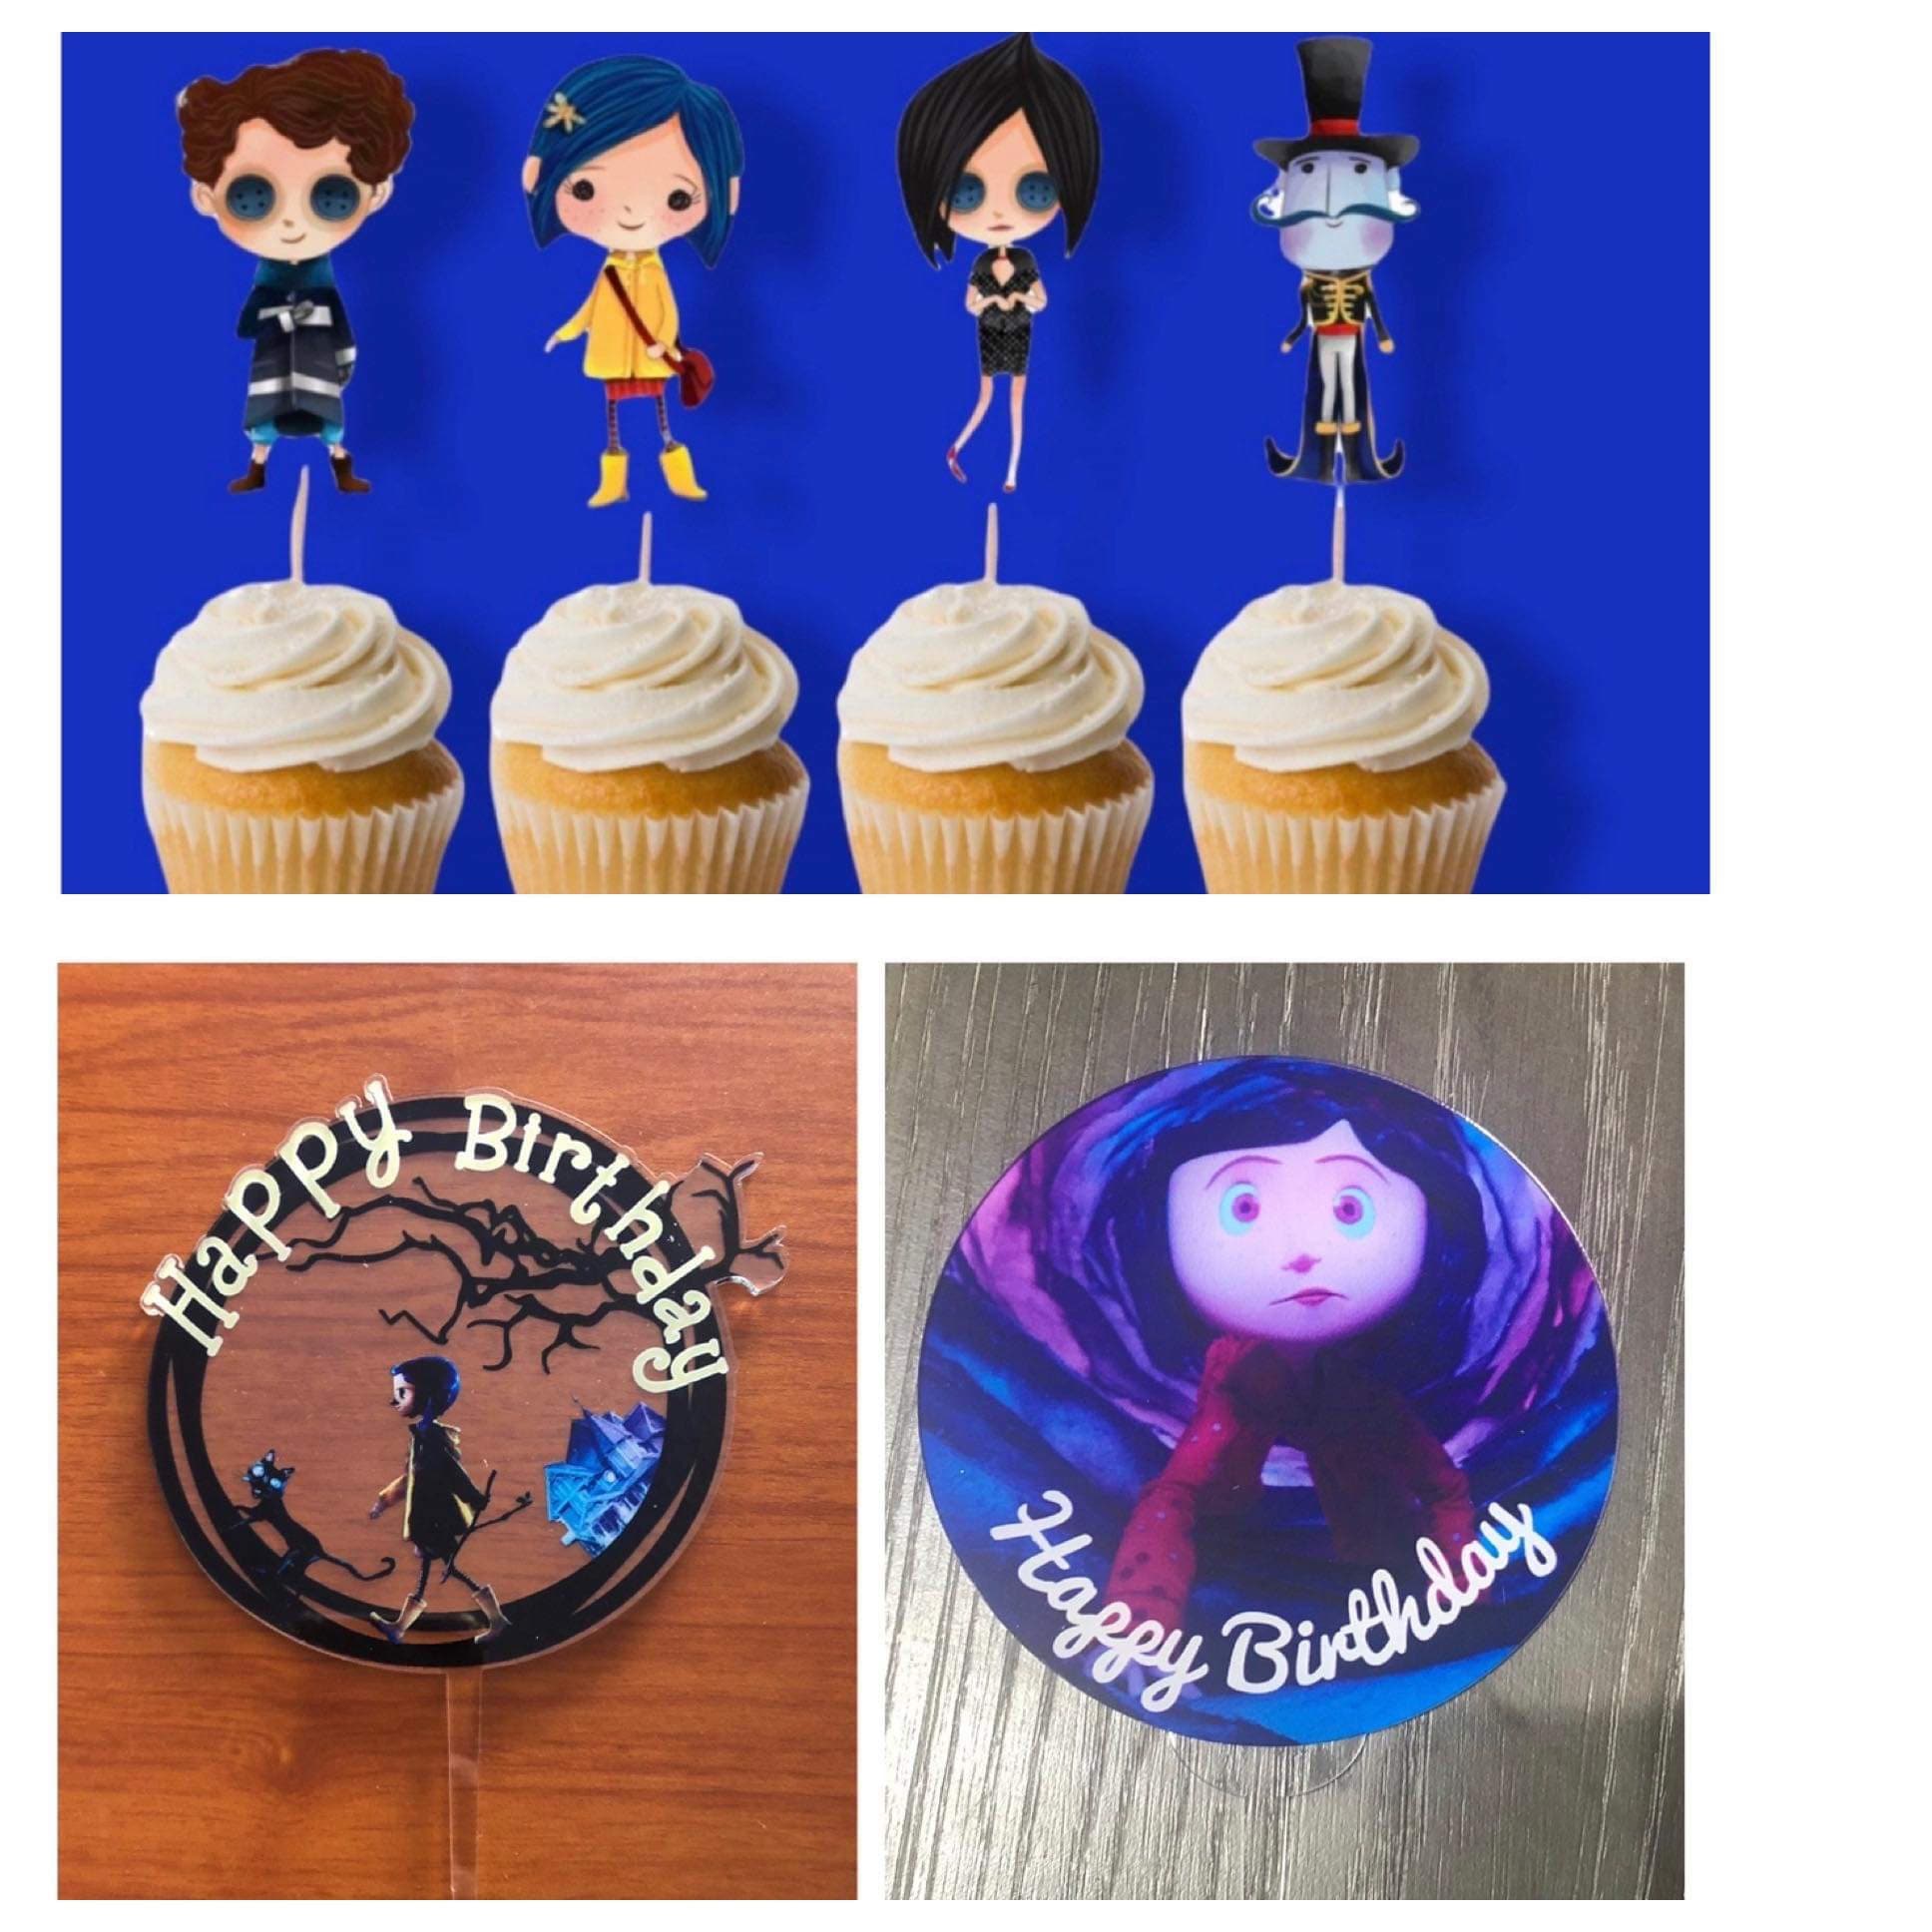 thinkstar Coraline Birthday Party Decorations,8Pcs Coraline Theme Party  Centerpieces For Tables,Photo Booth Props, Cake Toppers, Cor…